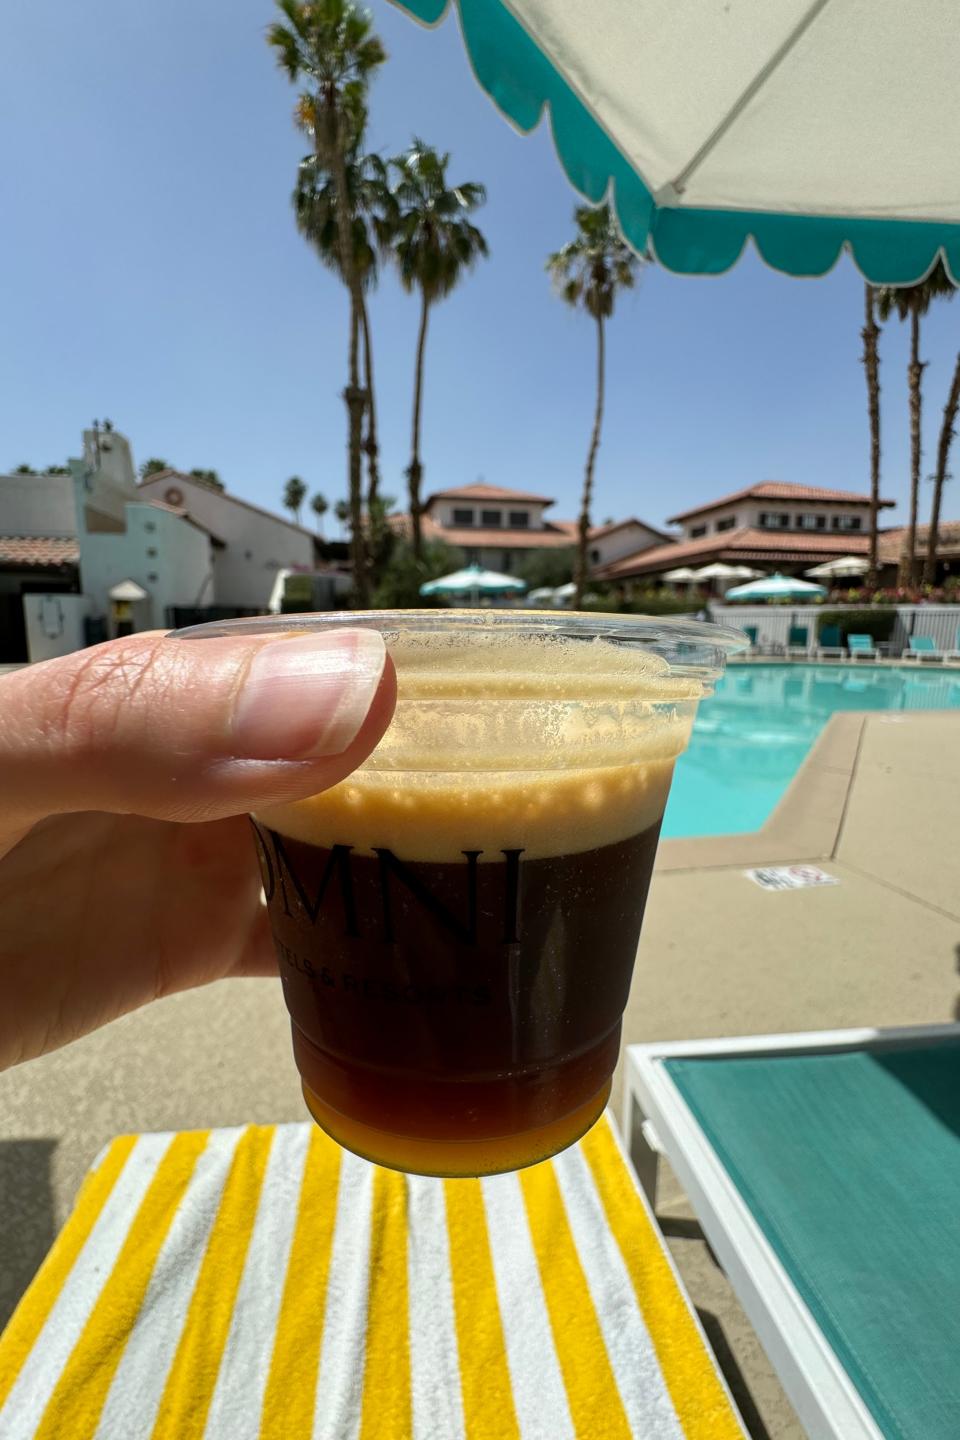 Person holding a cup of coffee by a pool with palm trees and loungers in the background